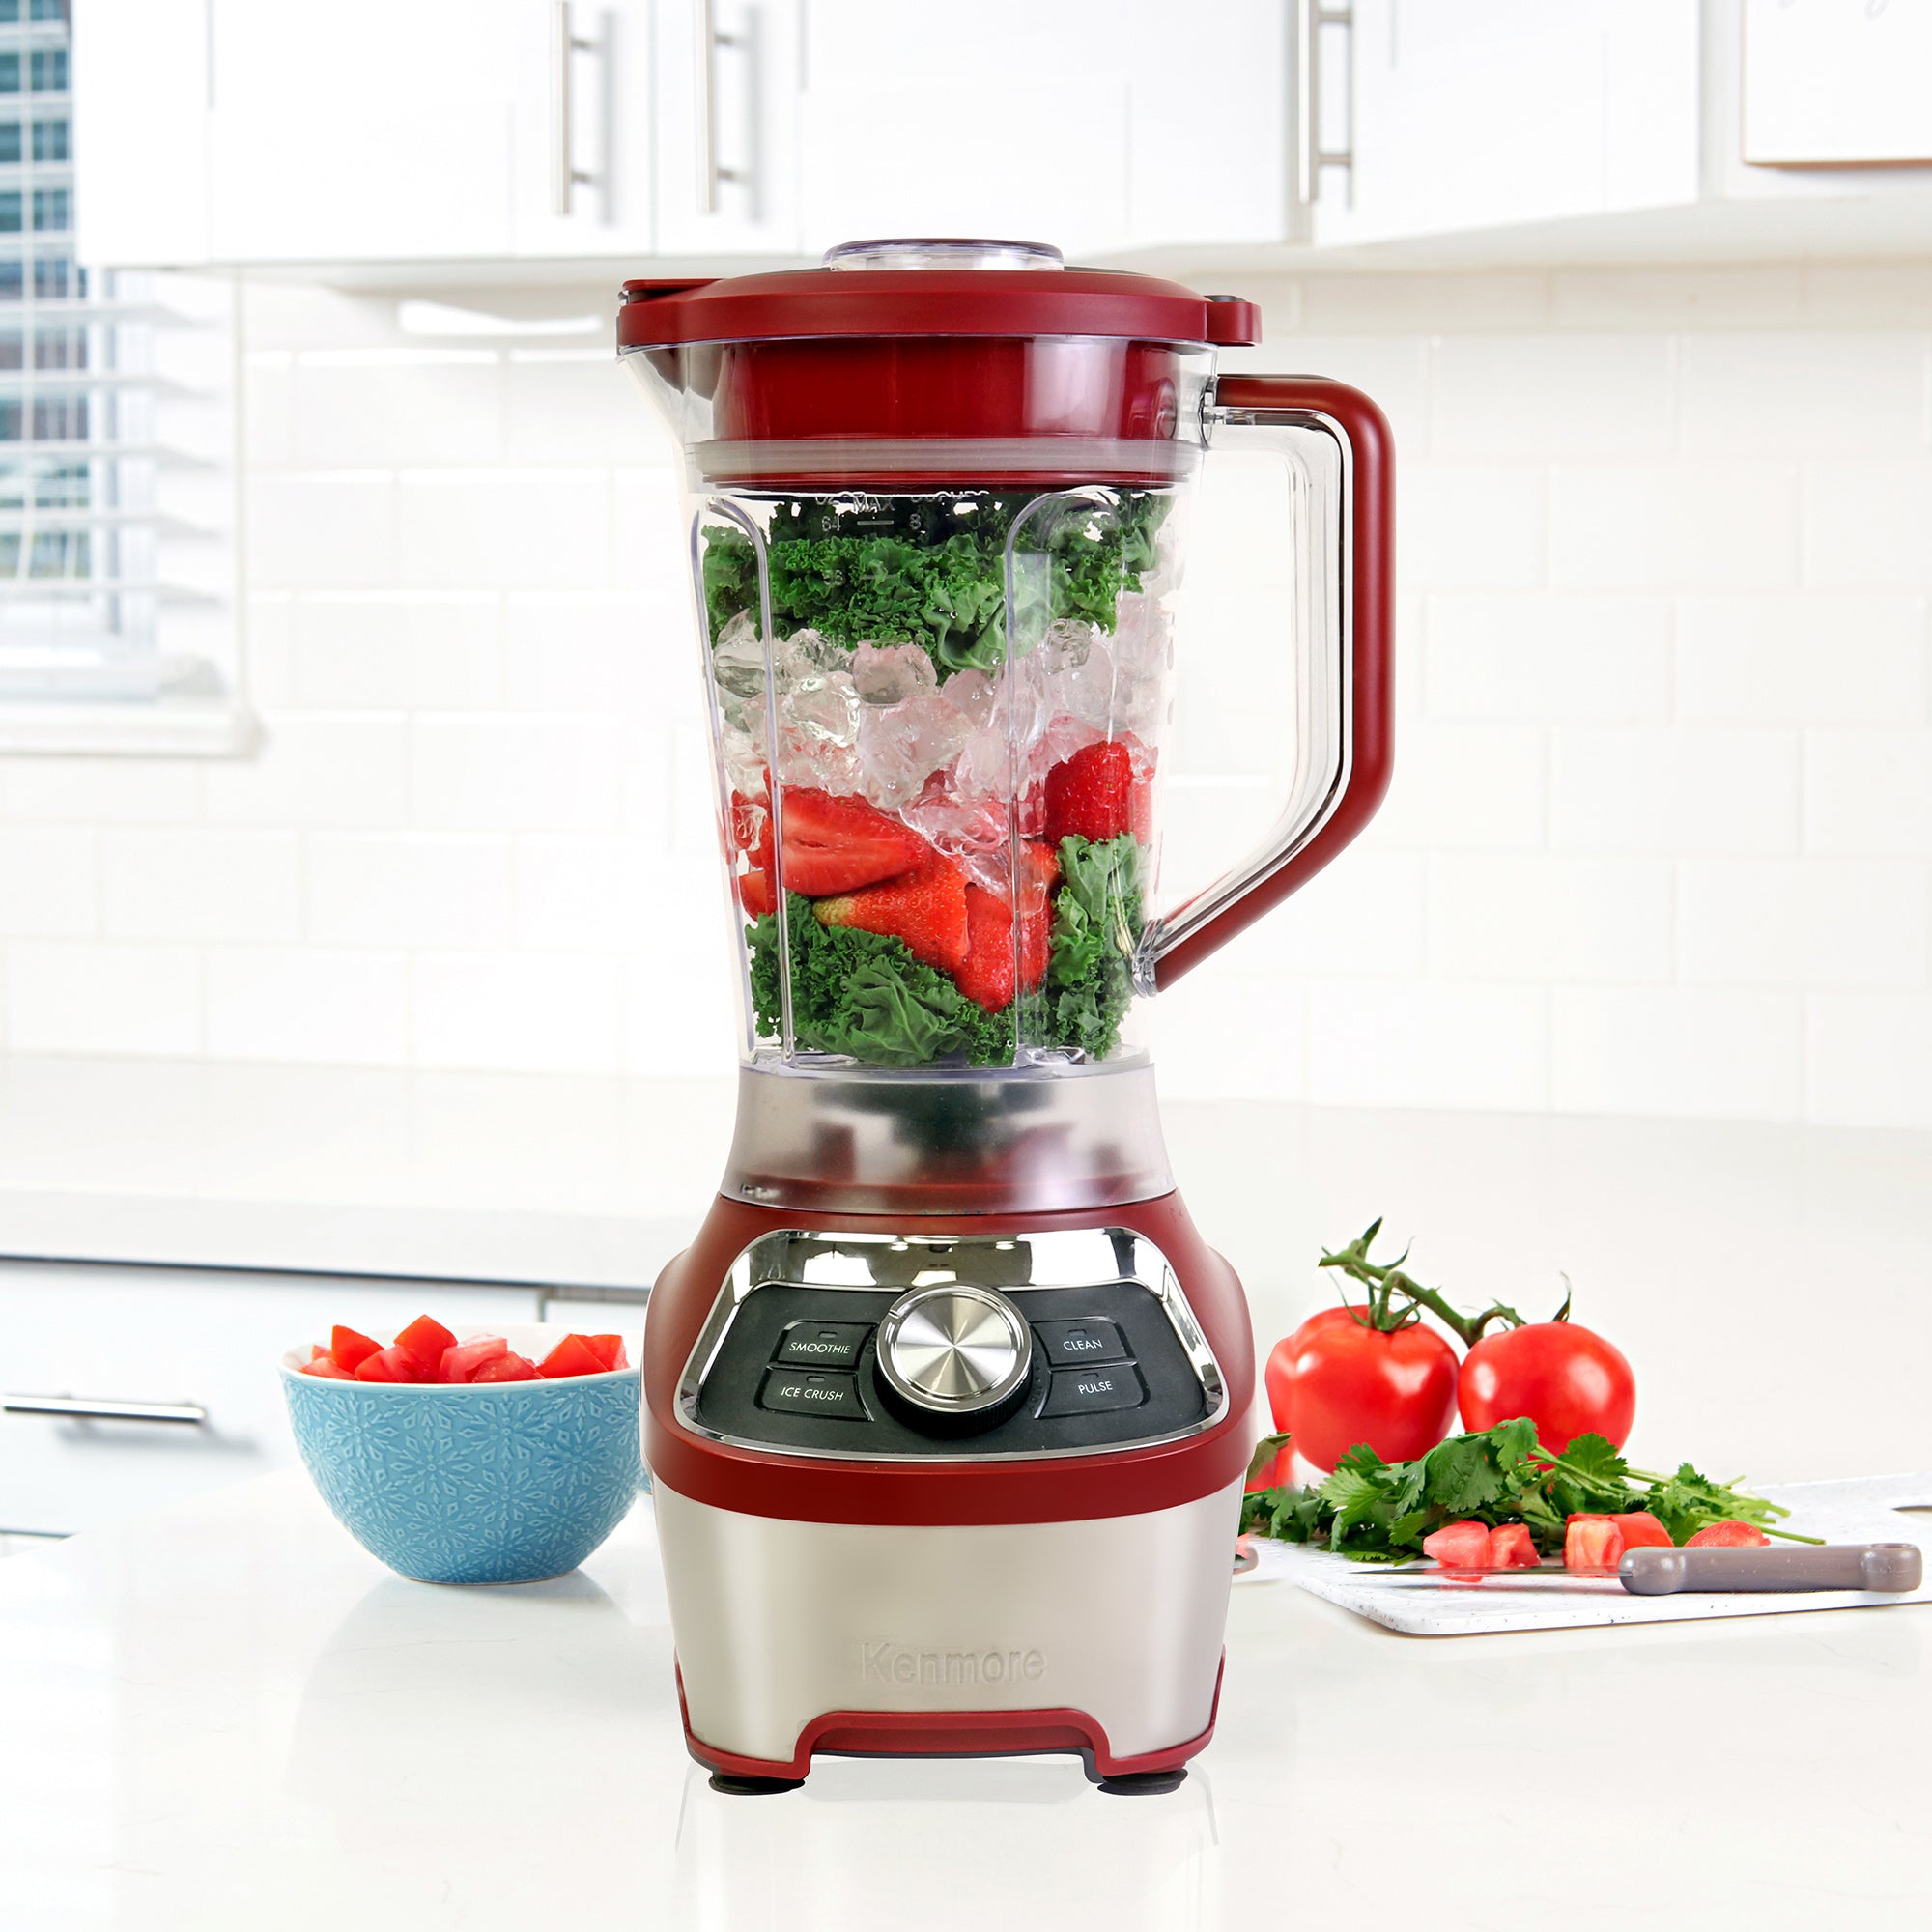 8 cup stand blender filled with salsa ingredients on a white countertop with chopped vegetables arranged around it.